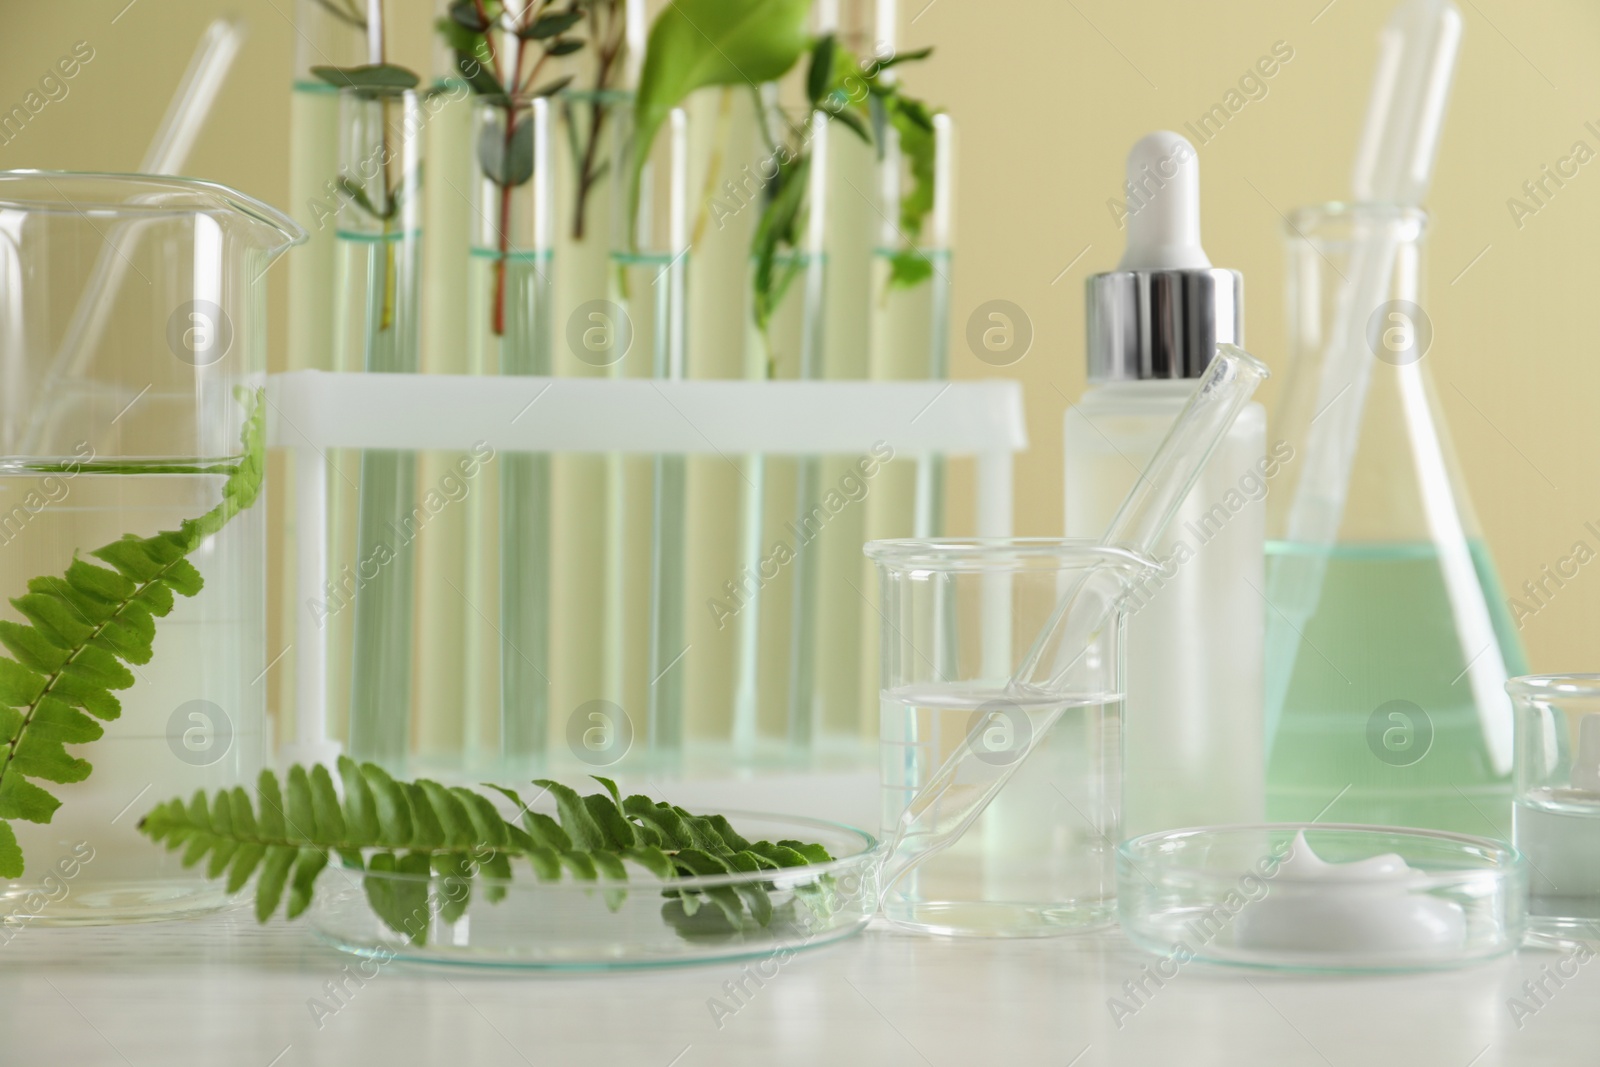 Photo of Natural ingredients for cosmetic products and laboratory glassware on white table